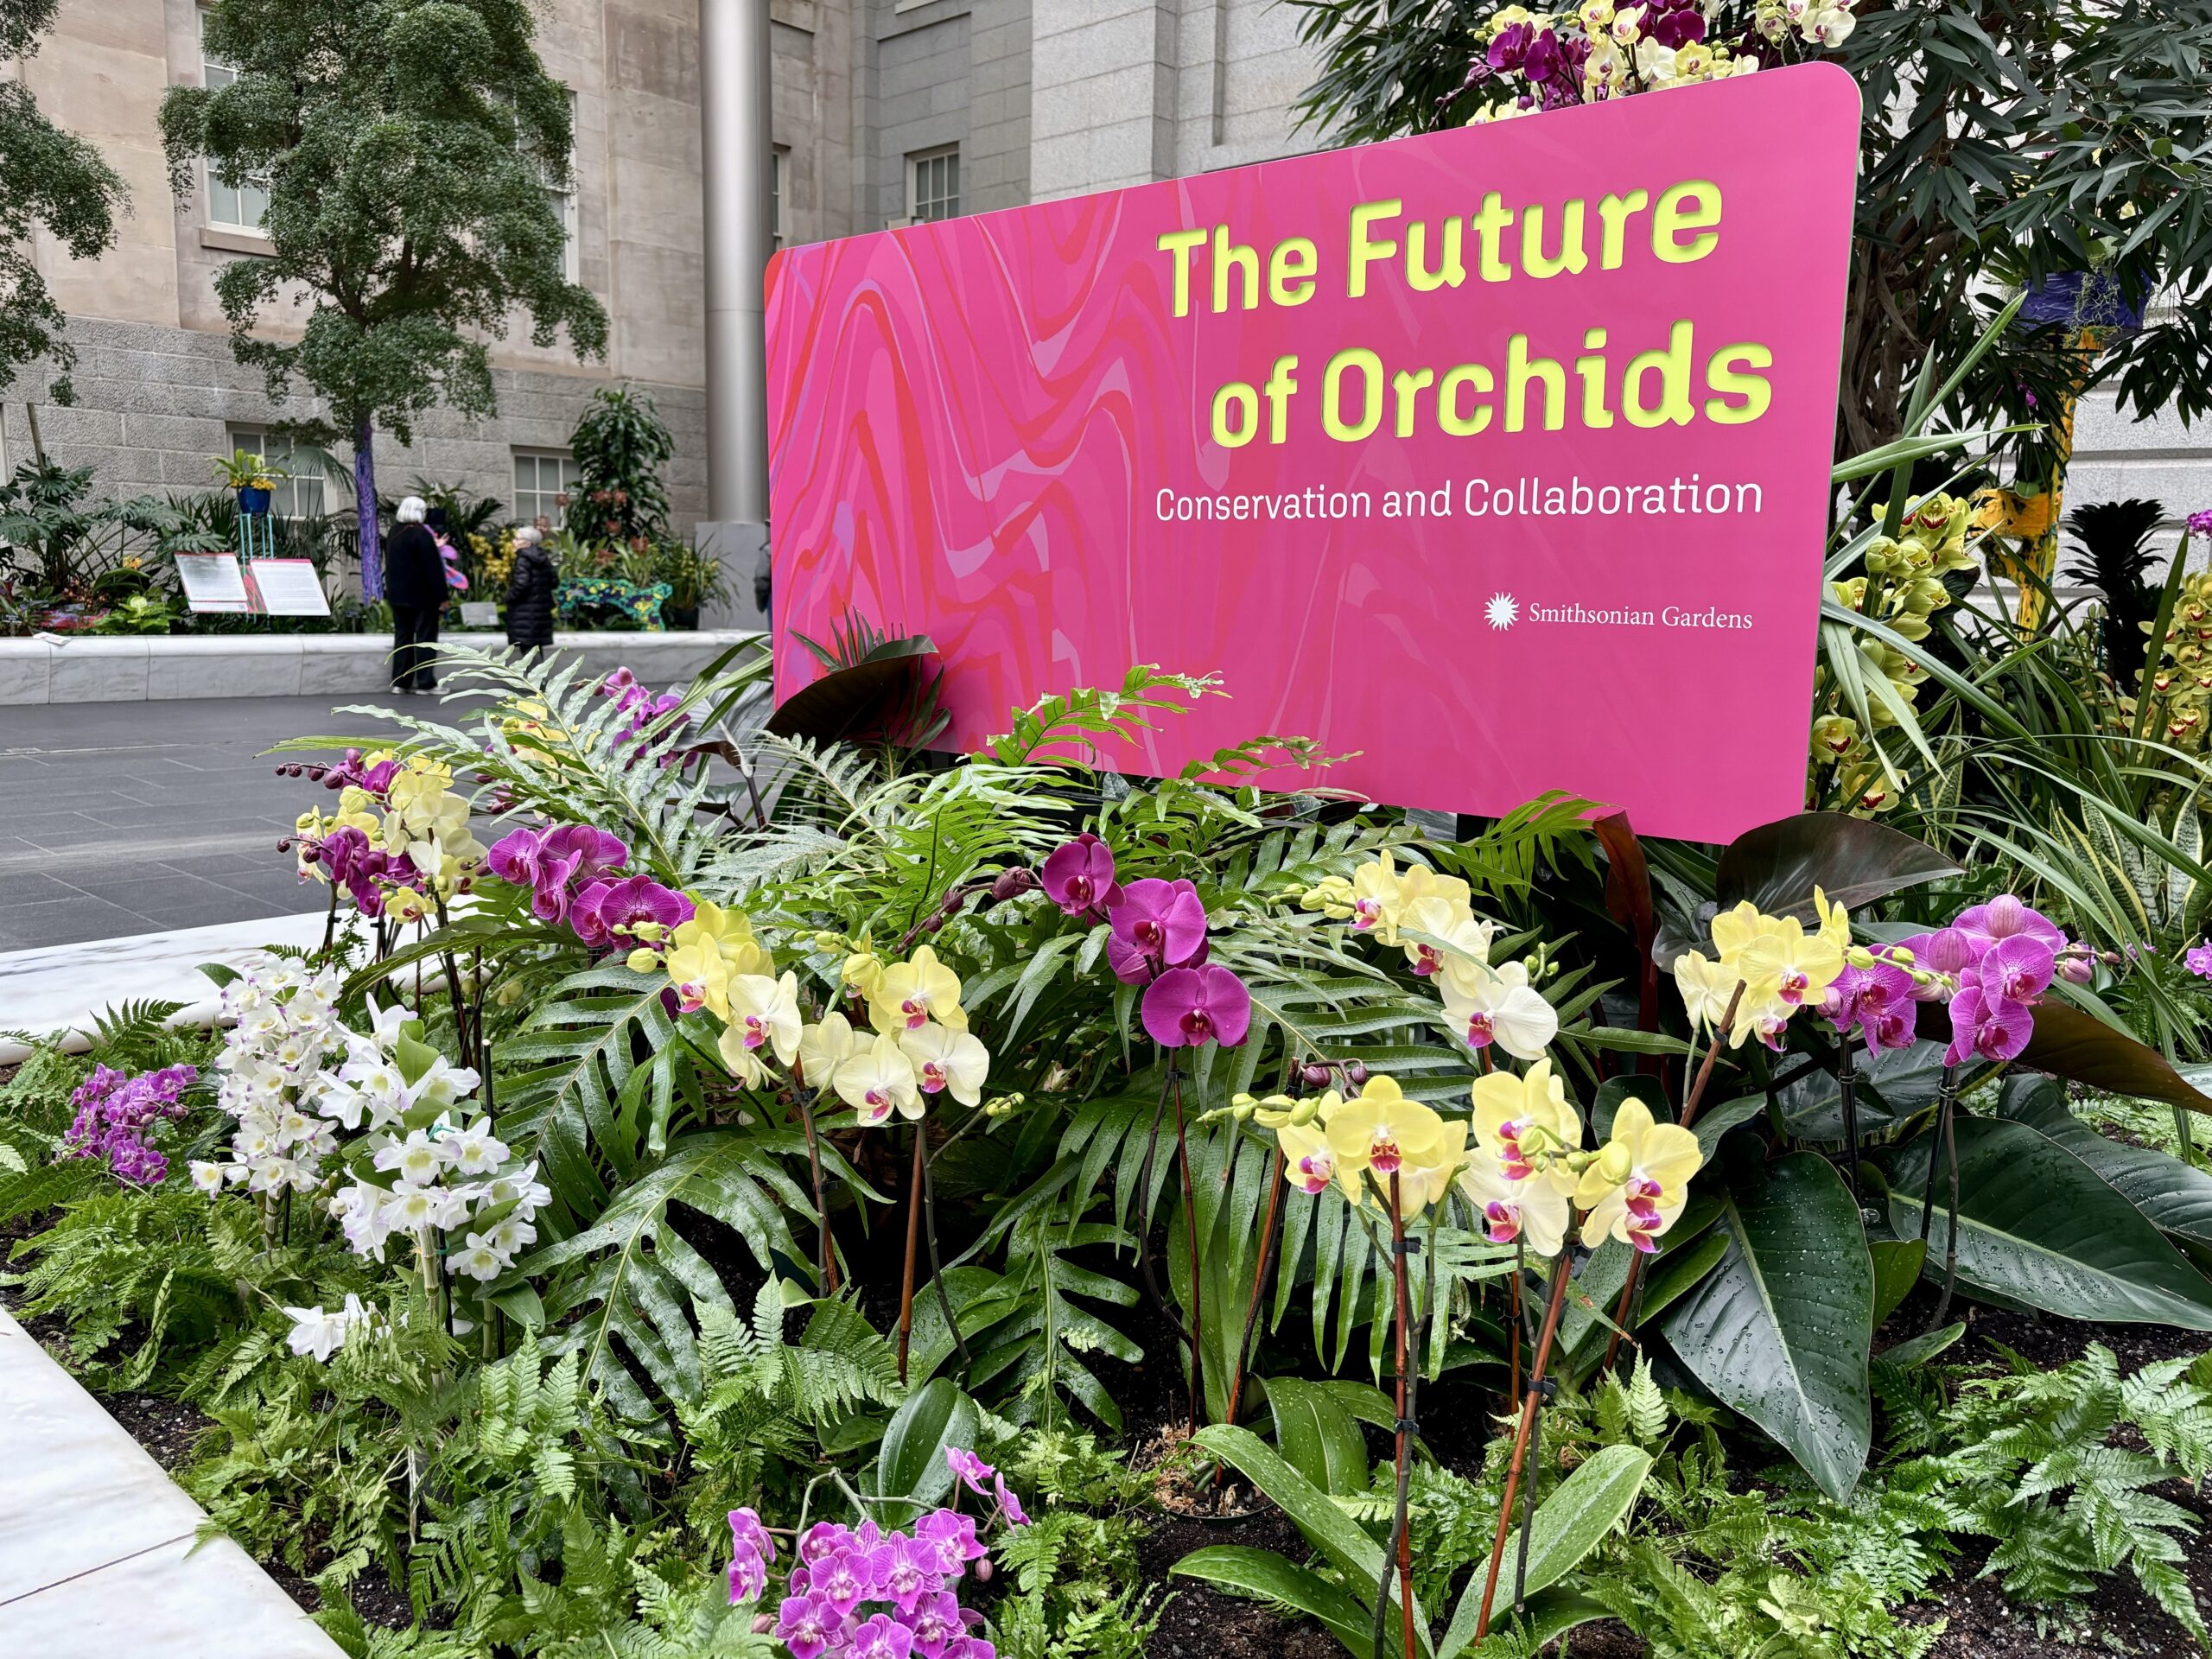 The collaborative orchid exhibit from Smithsonian Gardens and the U.S. Botanic Garden in the Kogod Courtyard focuses on environmental factors and conservation. (Yesenia Montenegro/Capital News Service)